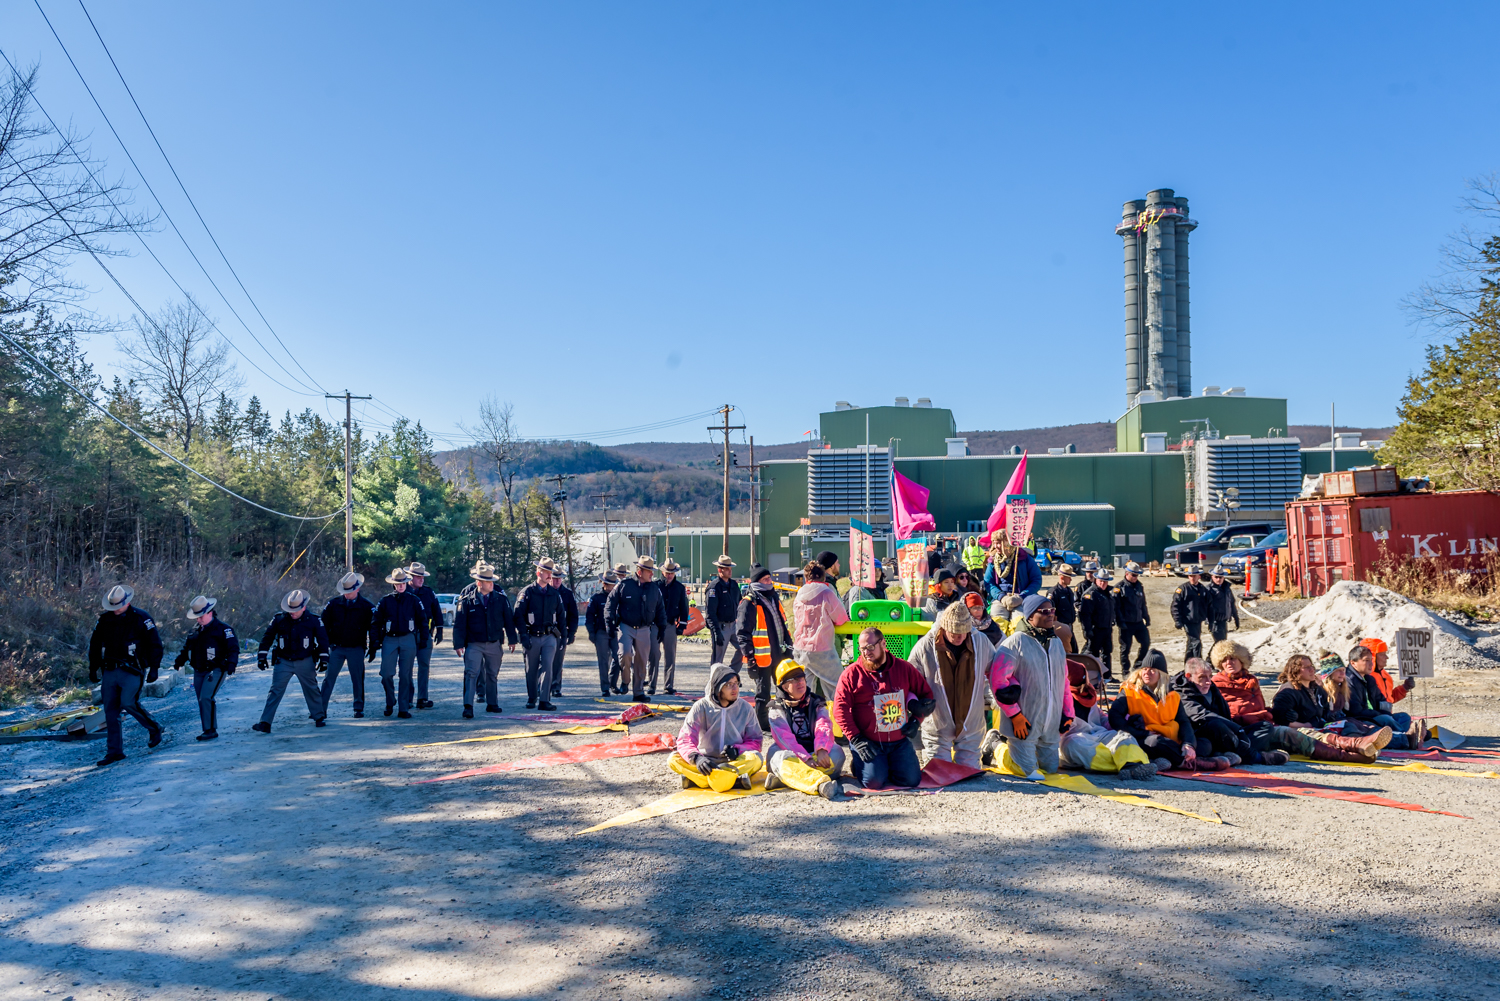 Law enforcement surrounds protesters blocking construction at the Cricket Valley natural gas power plant